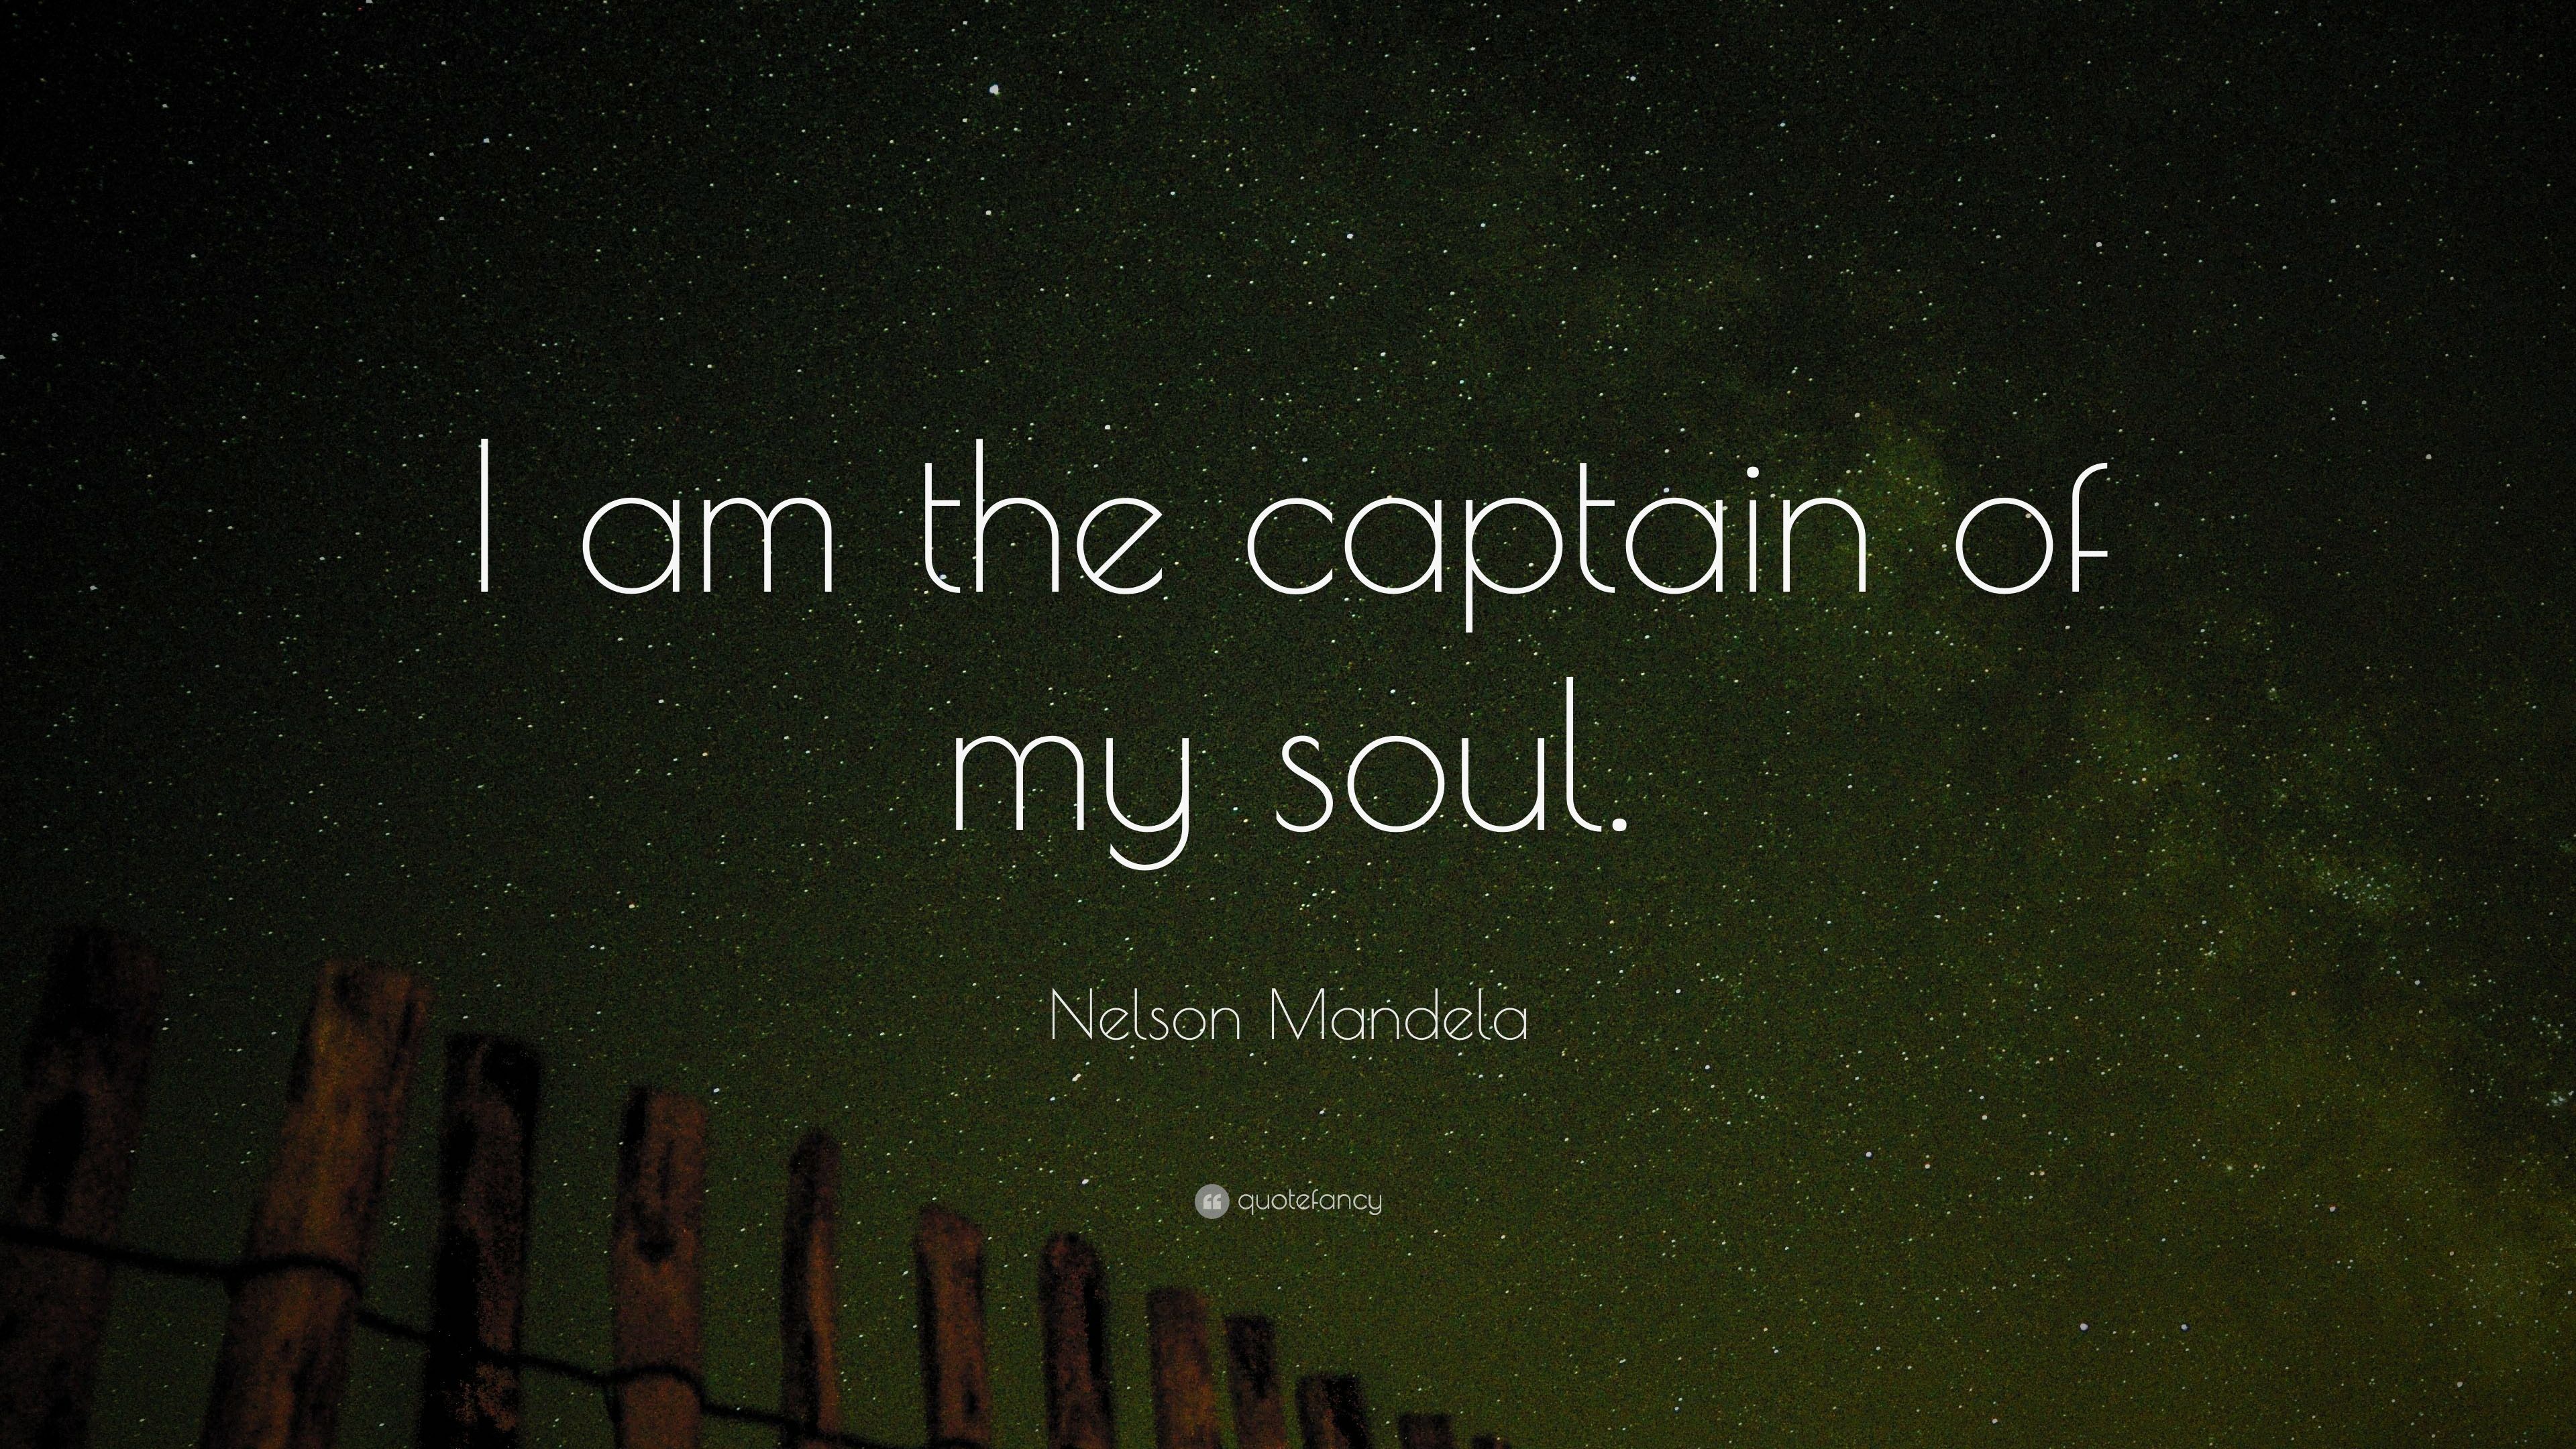 Who AM I Quotes Soul. Nelson Mandela Quote: “I am the captain